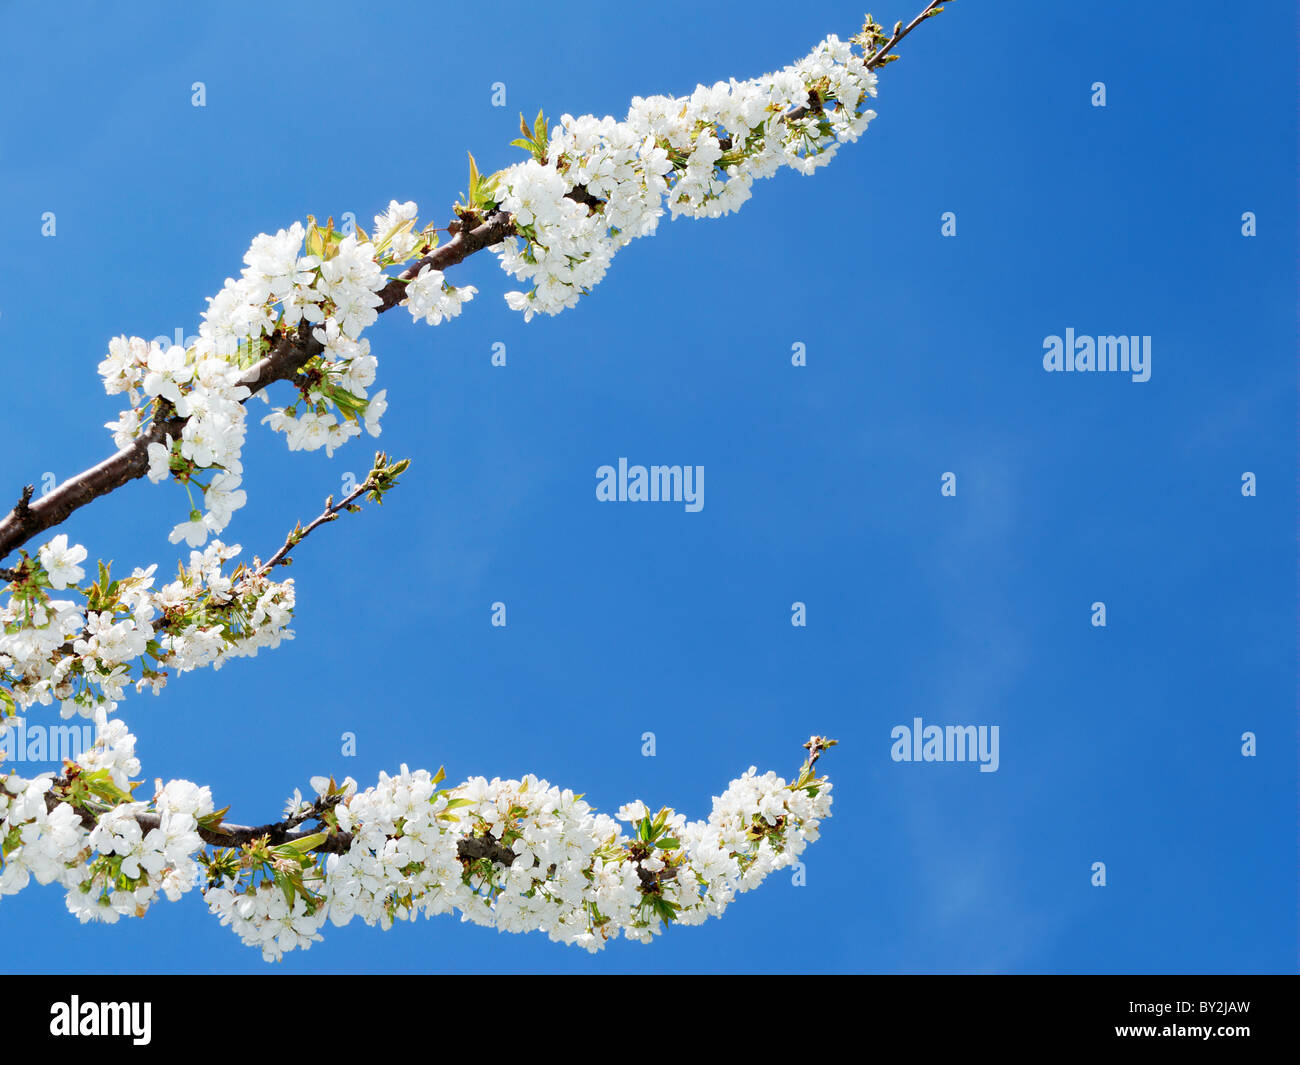 Springtime image with branches of white cherry blossom and blue sky Stock Photo